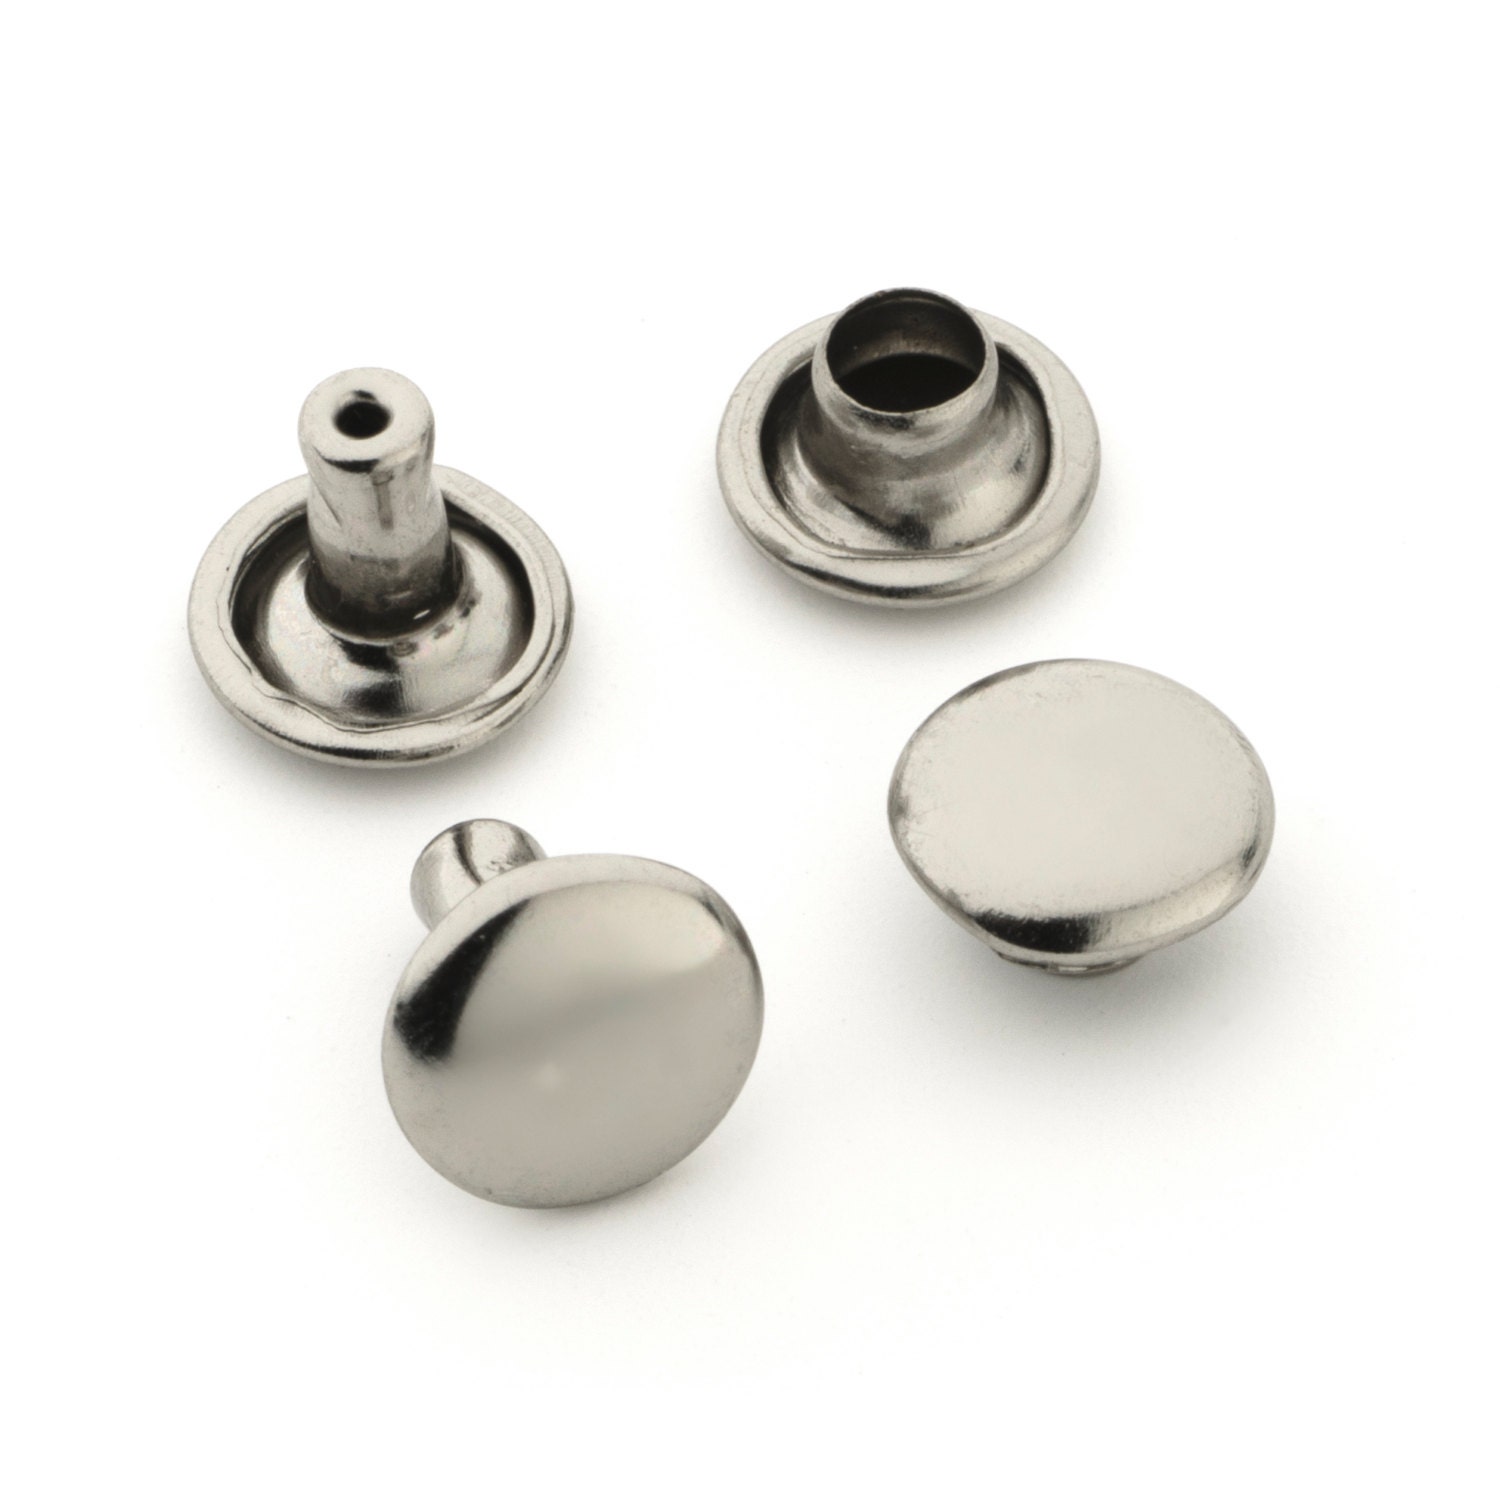 Stainless Steel Hypoallergenic Silver Rivets for Leather 50ct 6mm and 8mm  Nickel-free Double Cap Rivet Studs Fast Shipping From USA 3 